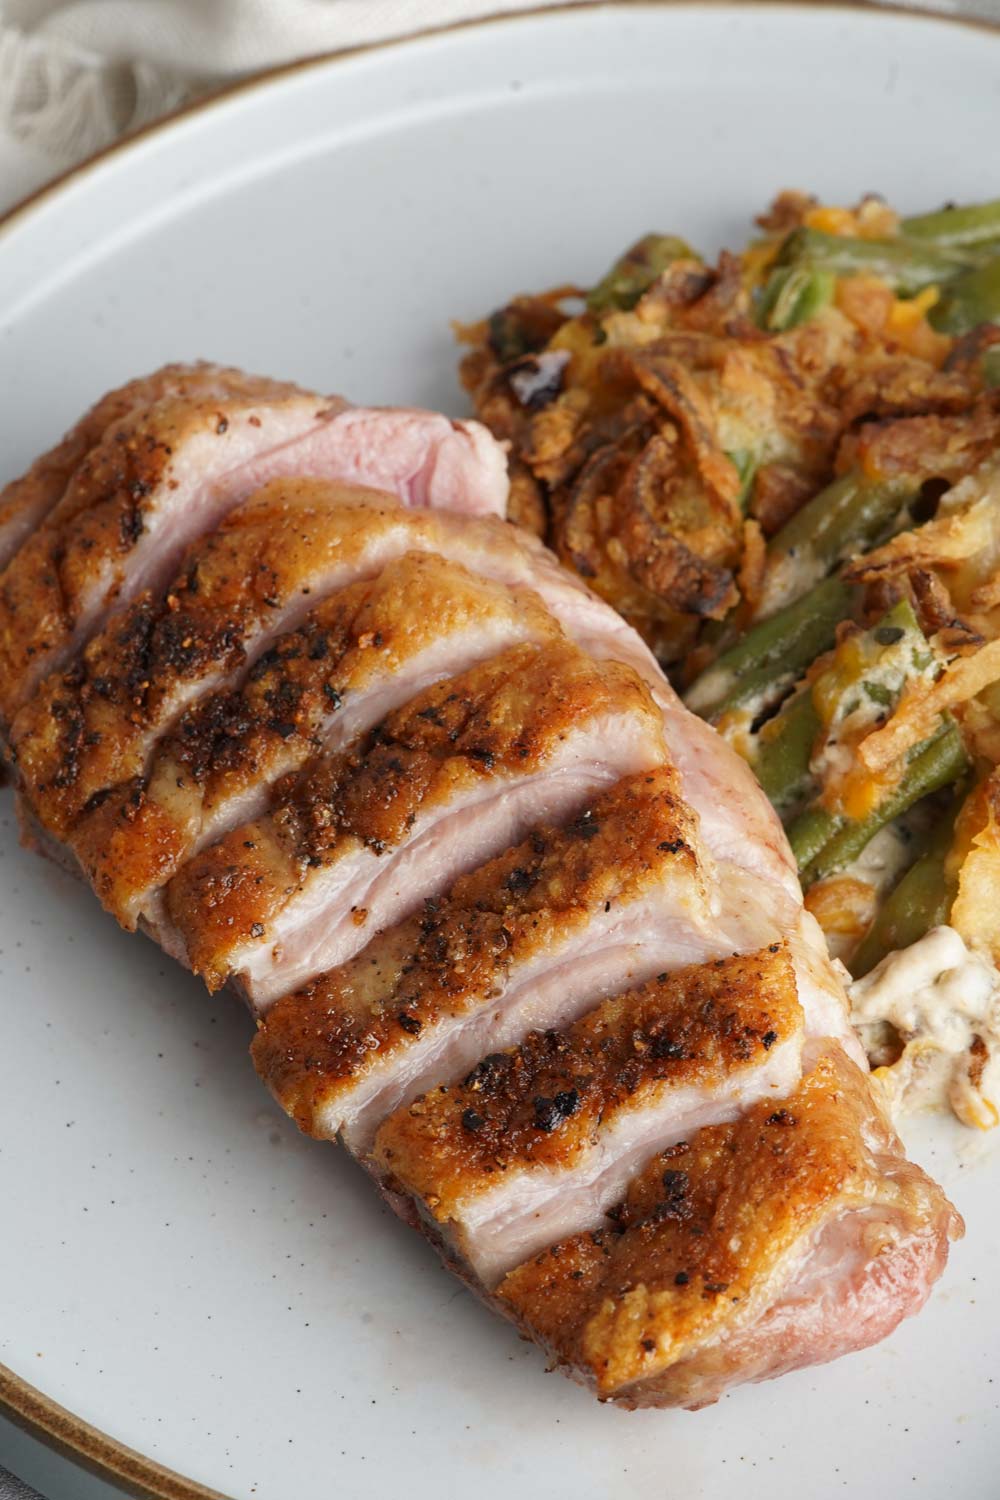 Sliced duck breast with green bean casserole